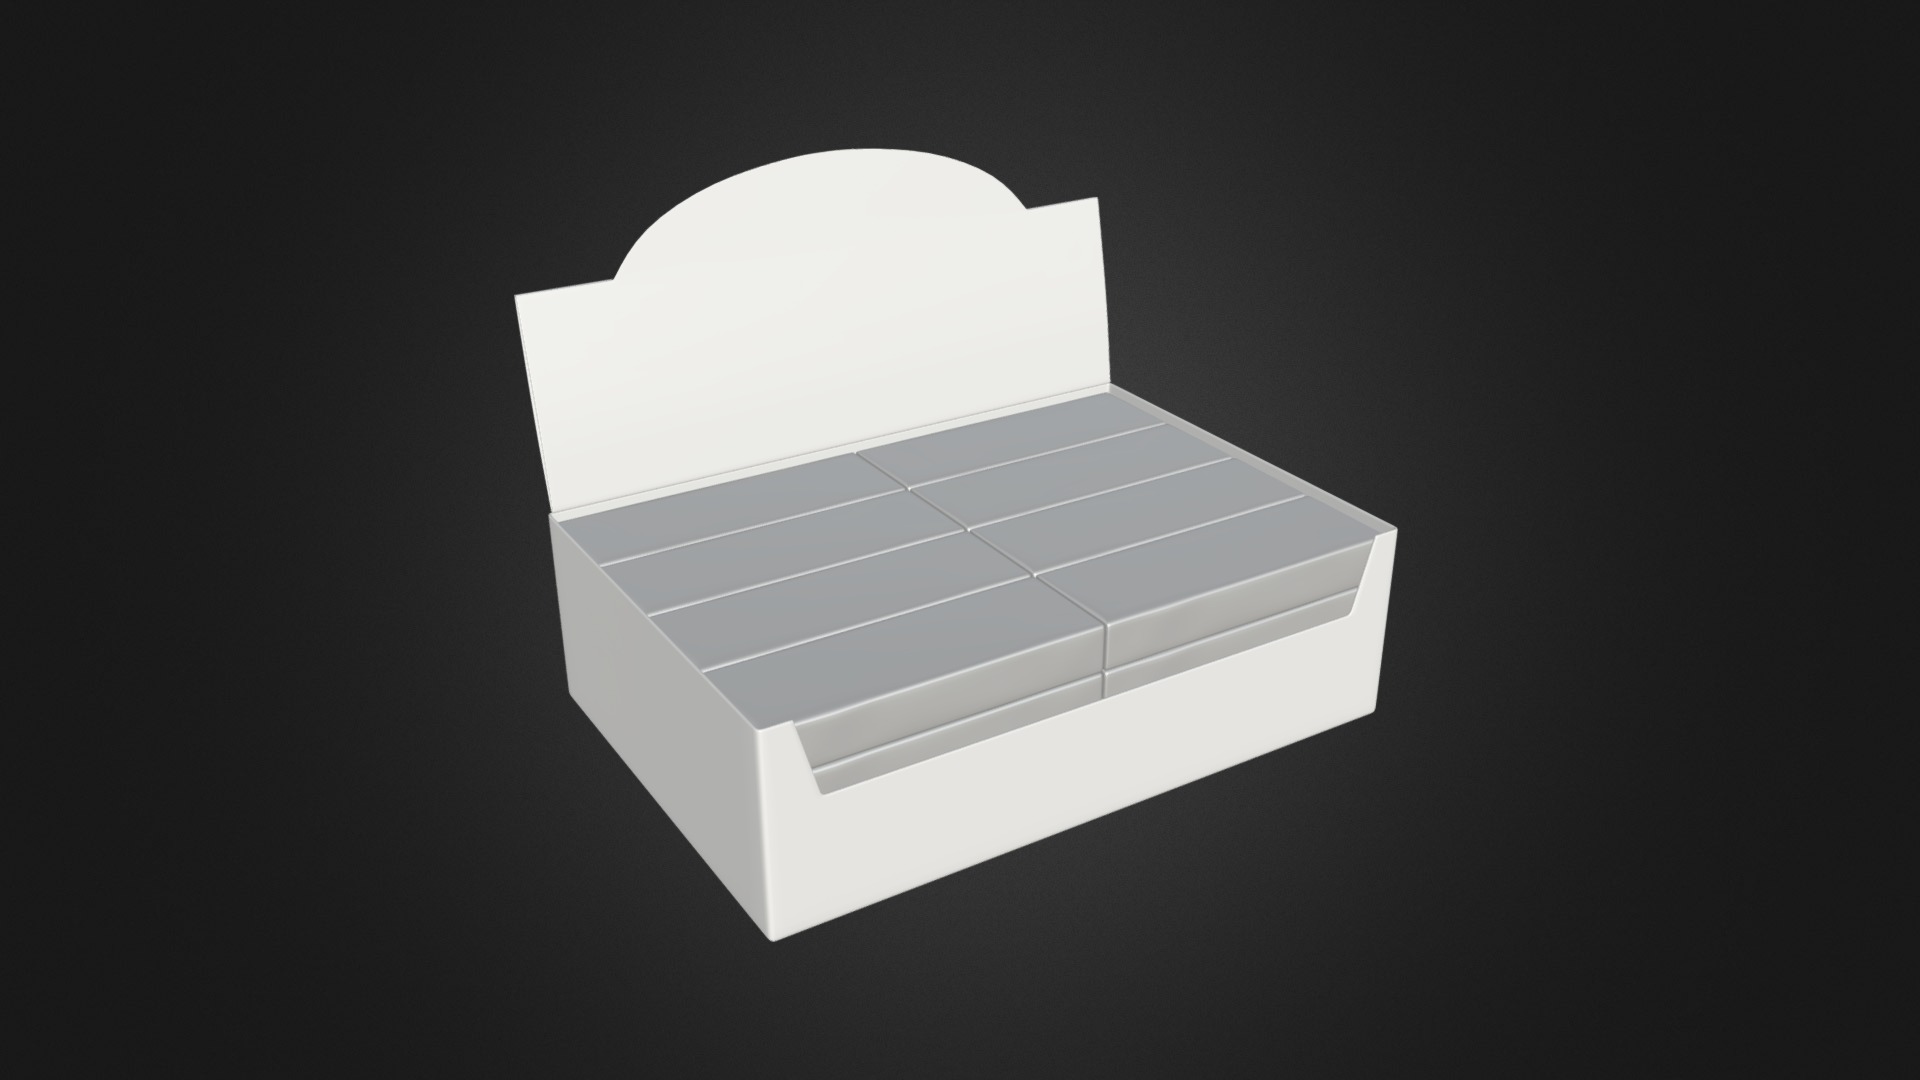 3D model box with chocolate bars wraps - This is a 3D model of the box with chocolate bars wraps. The 3D model is about a cube with a white circle in the middle.